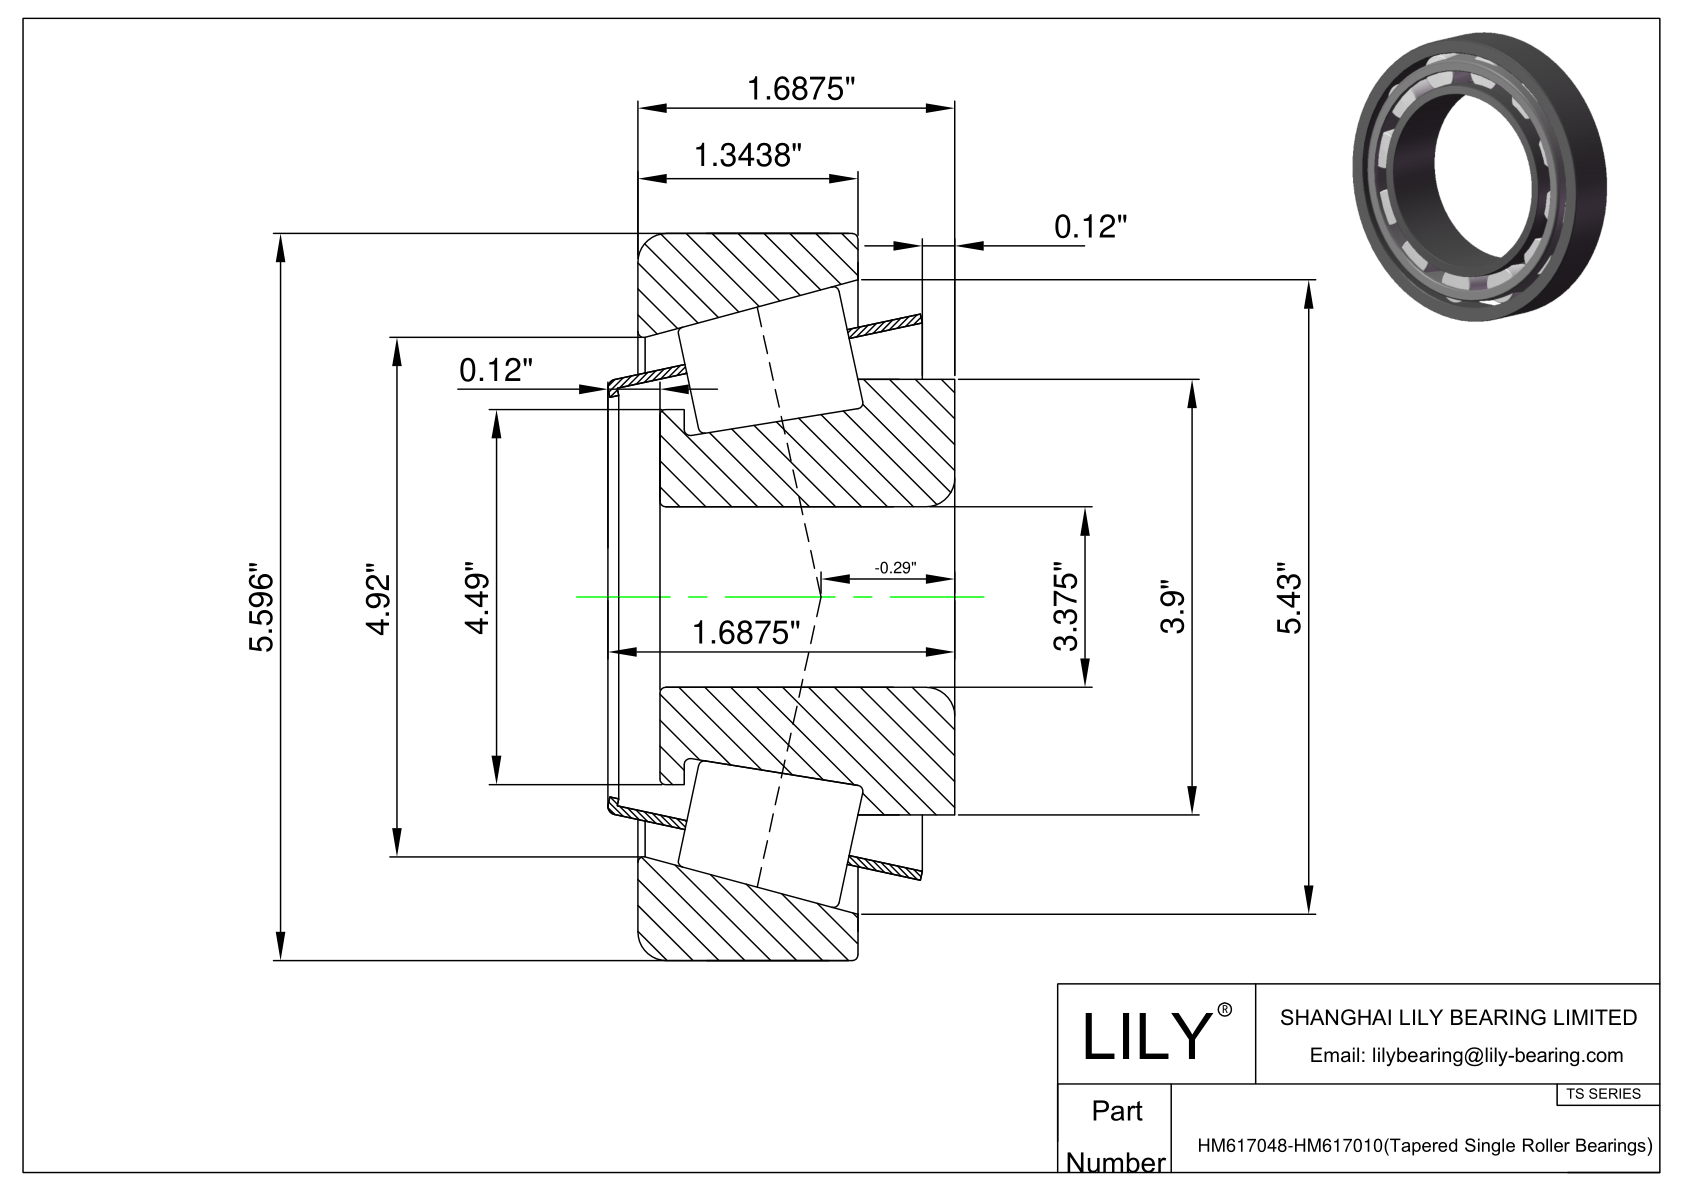 HM617048-HM617010 TS (Tapered Single Roller Bearings) (Imperial) cad drawing